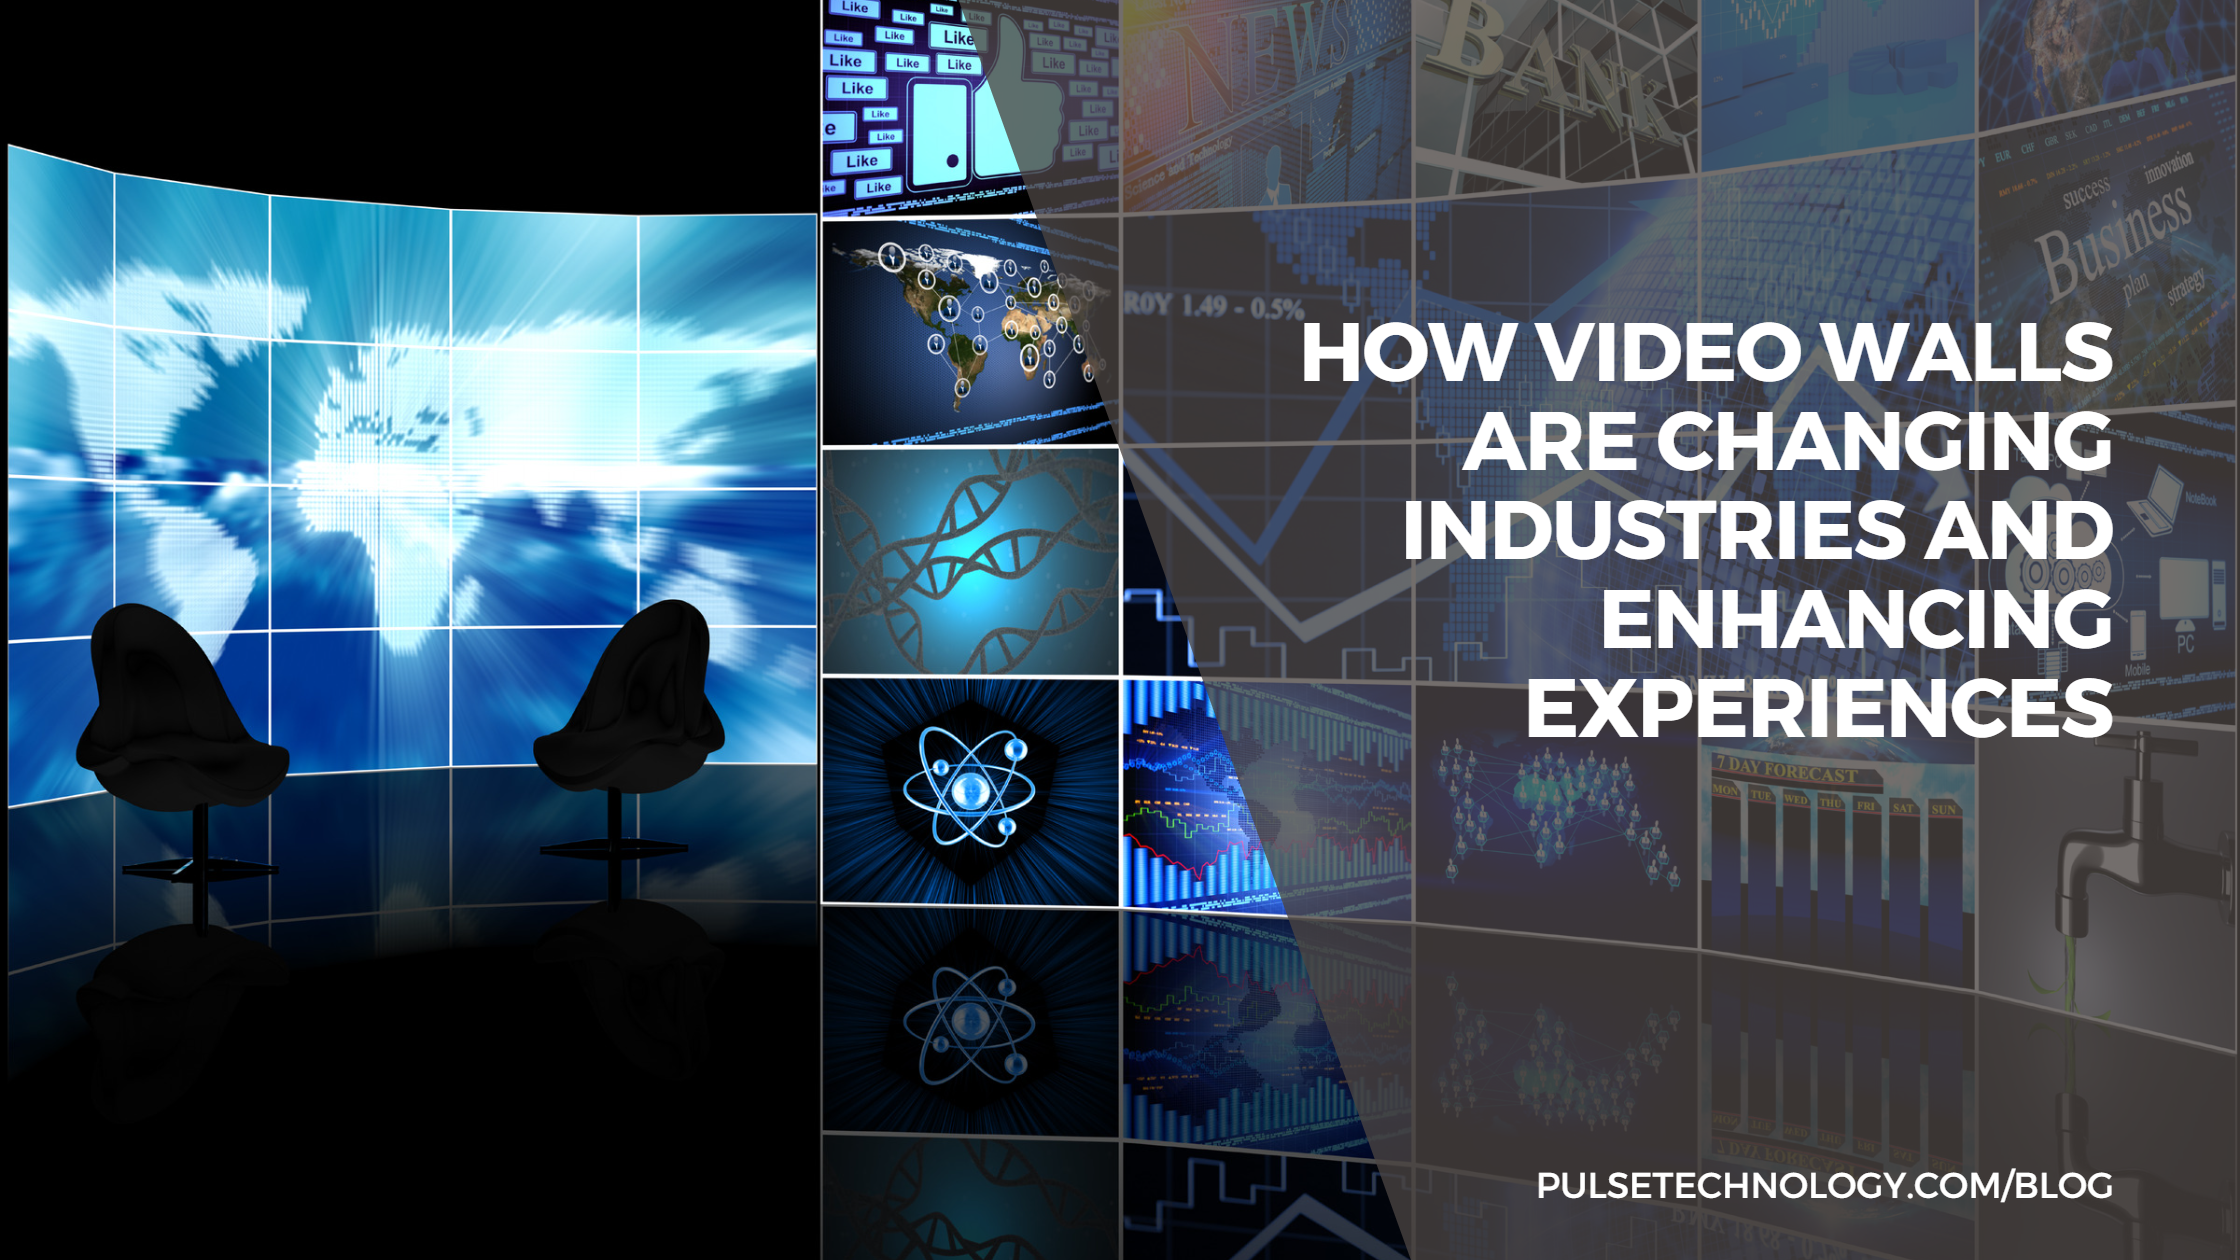 Video Walls are Changing Industries and Experiences